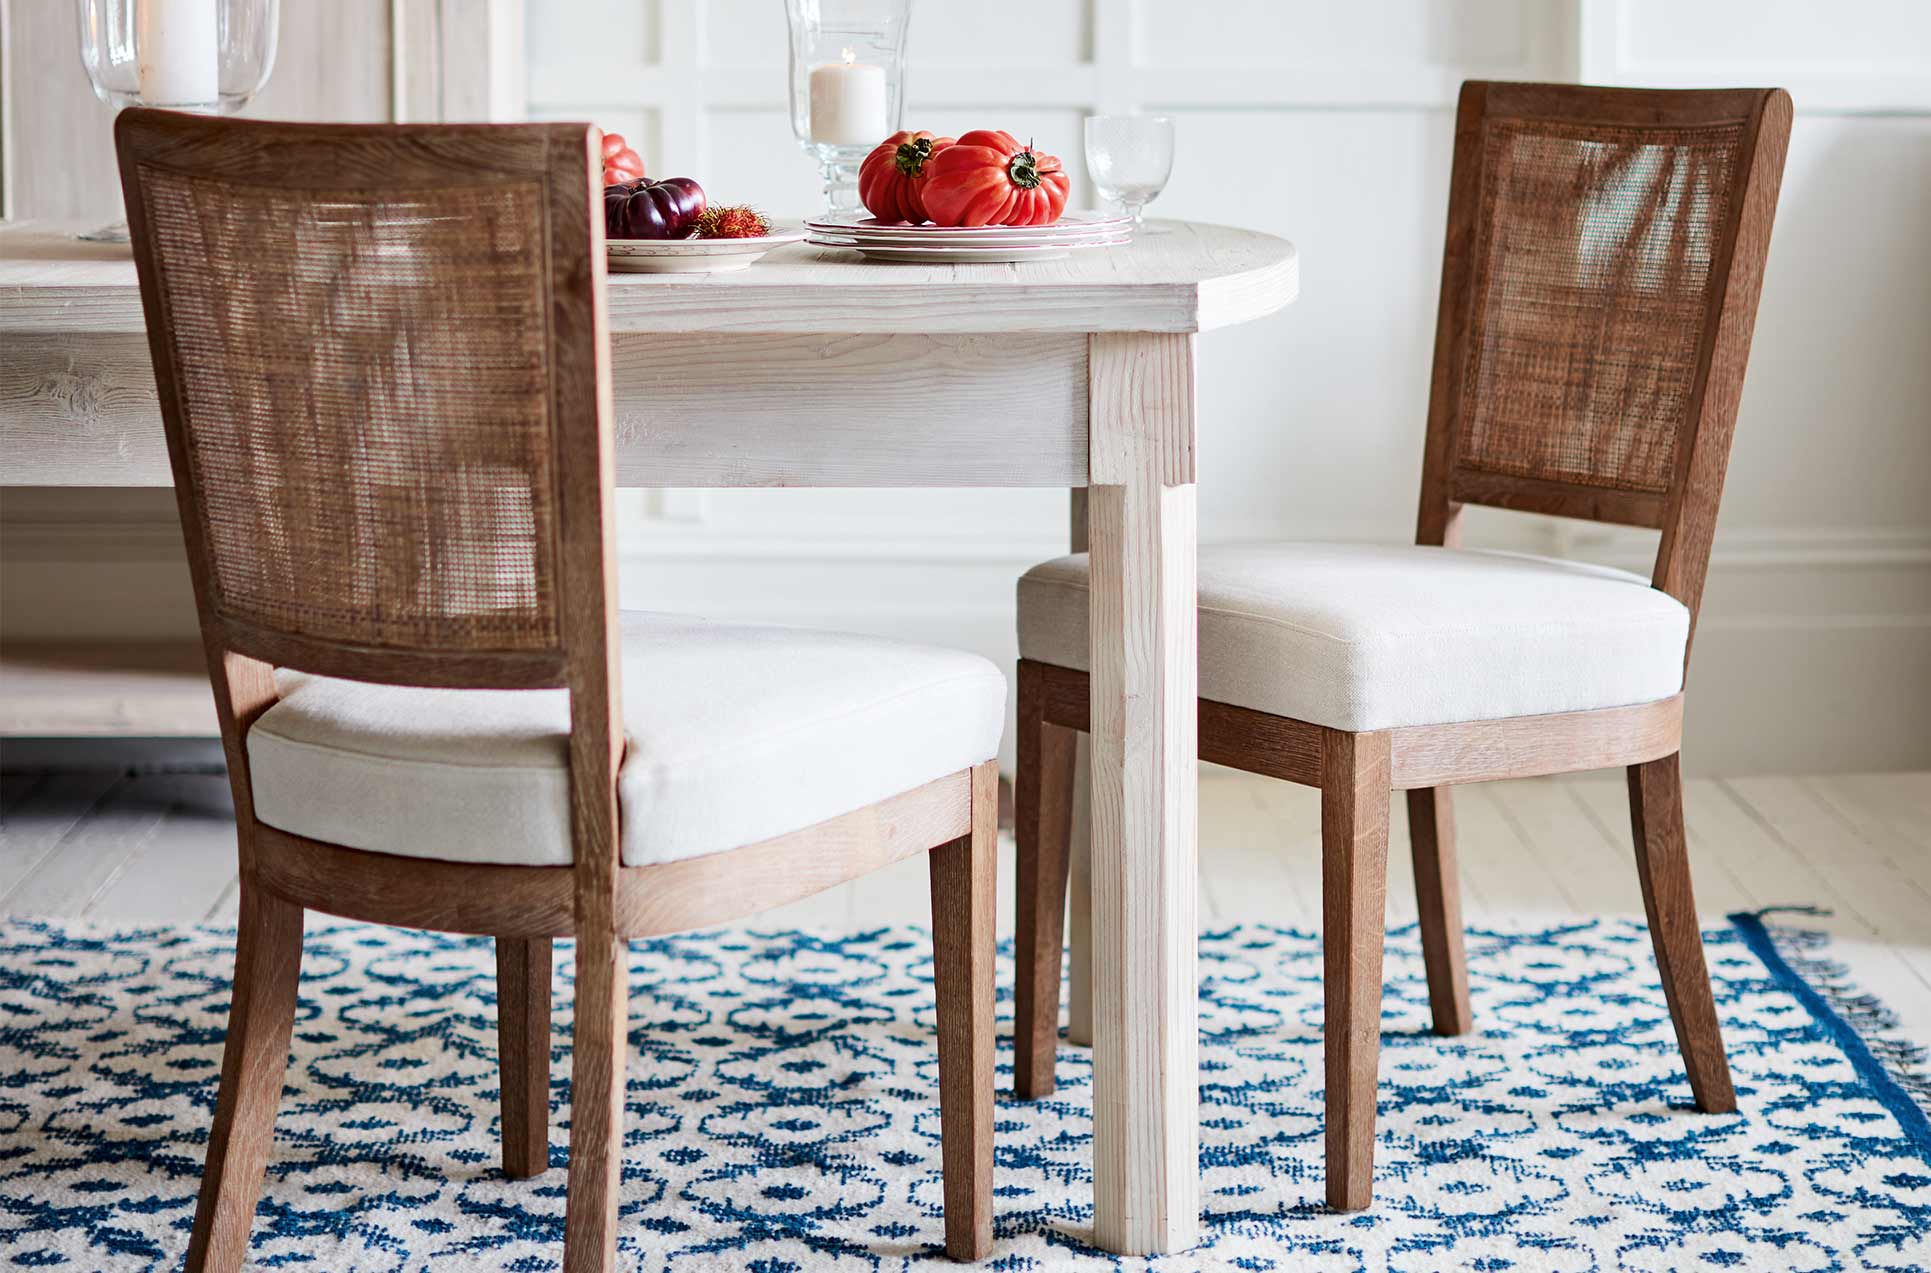 Rattan dining chairs with white linen seats